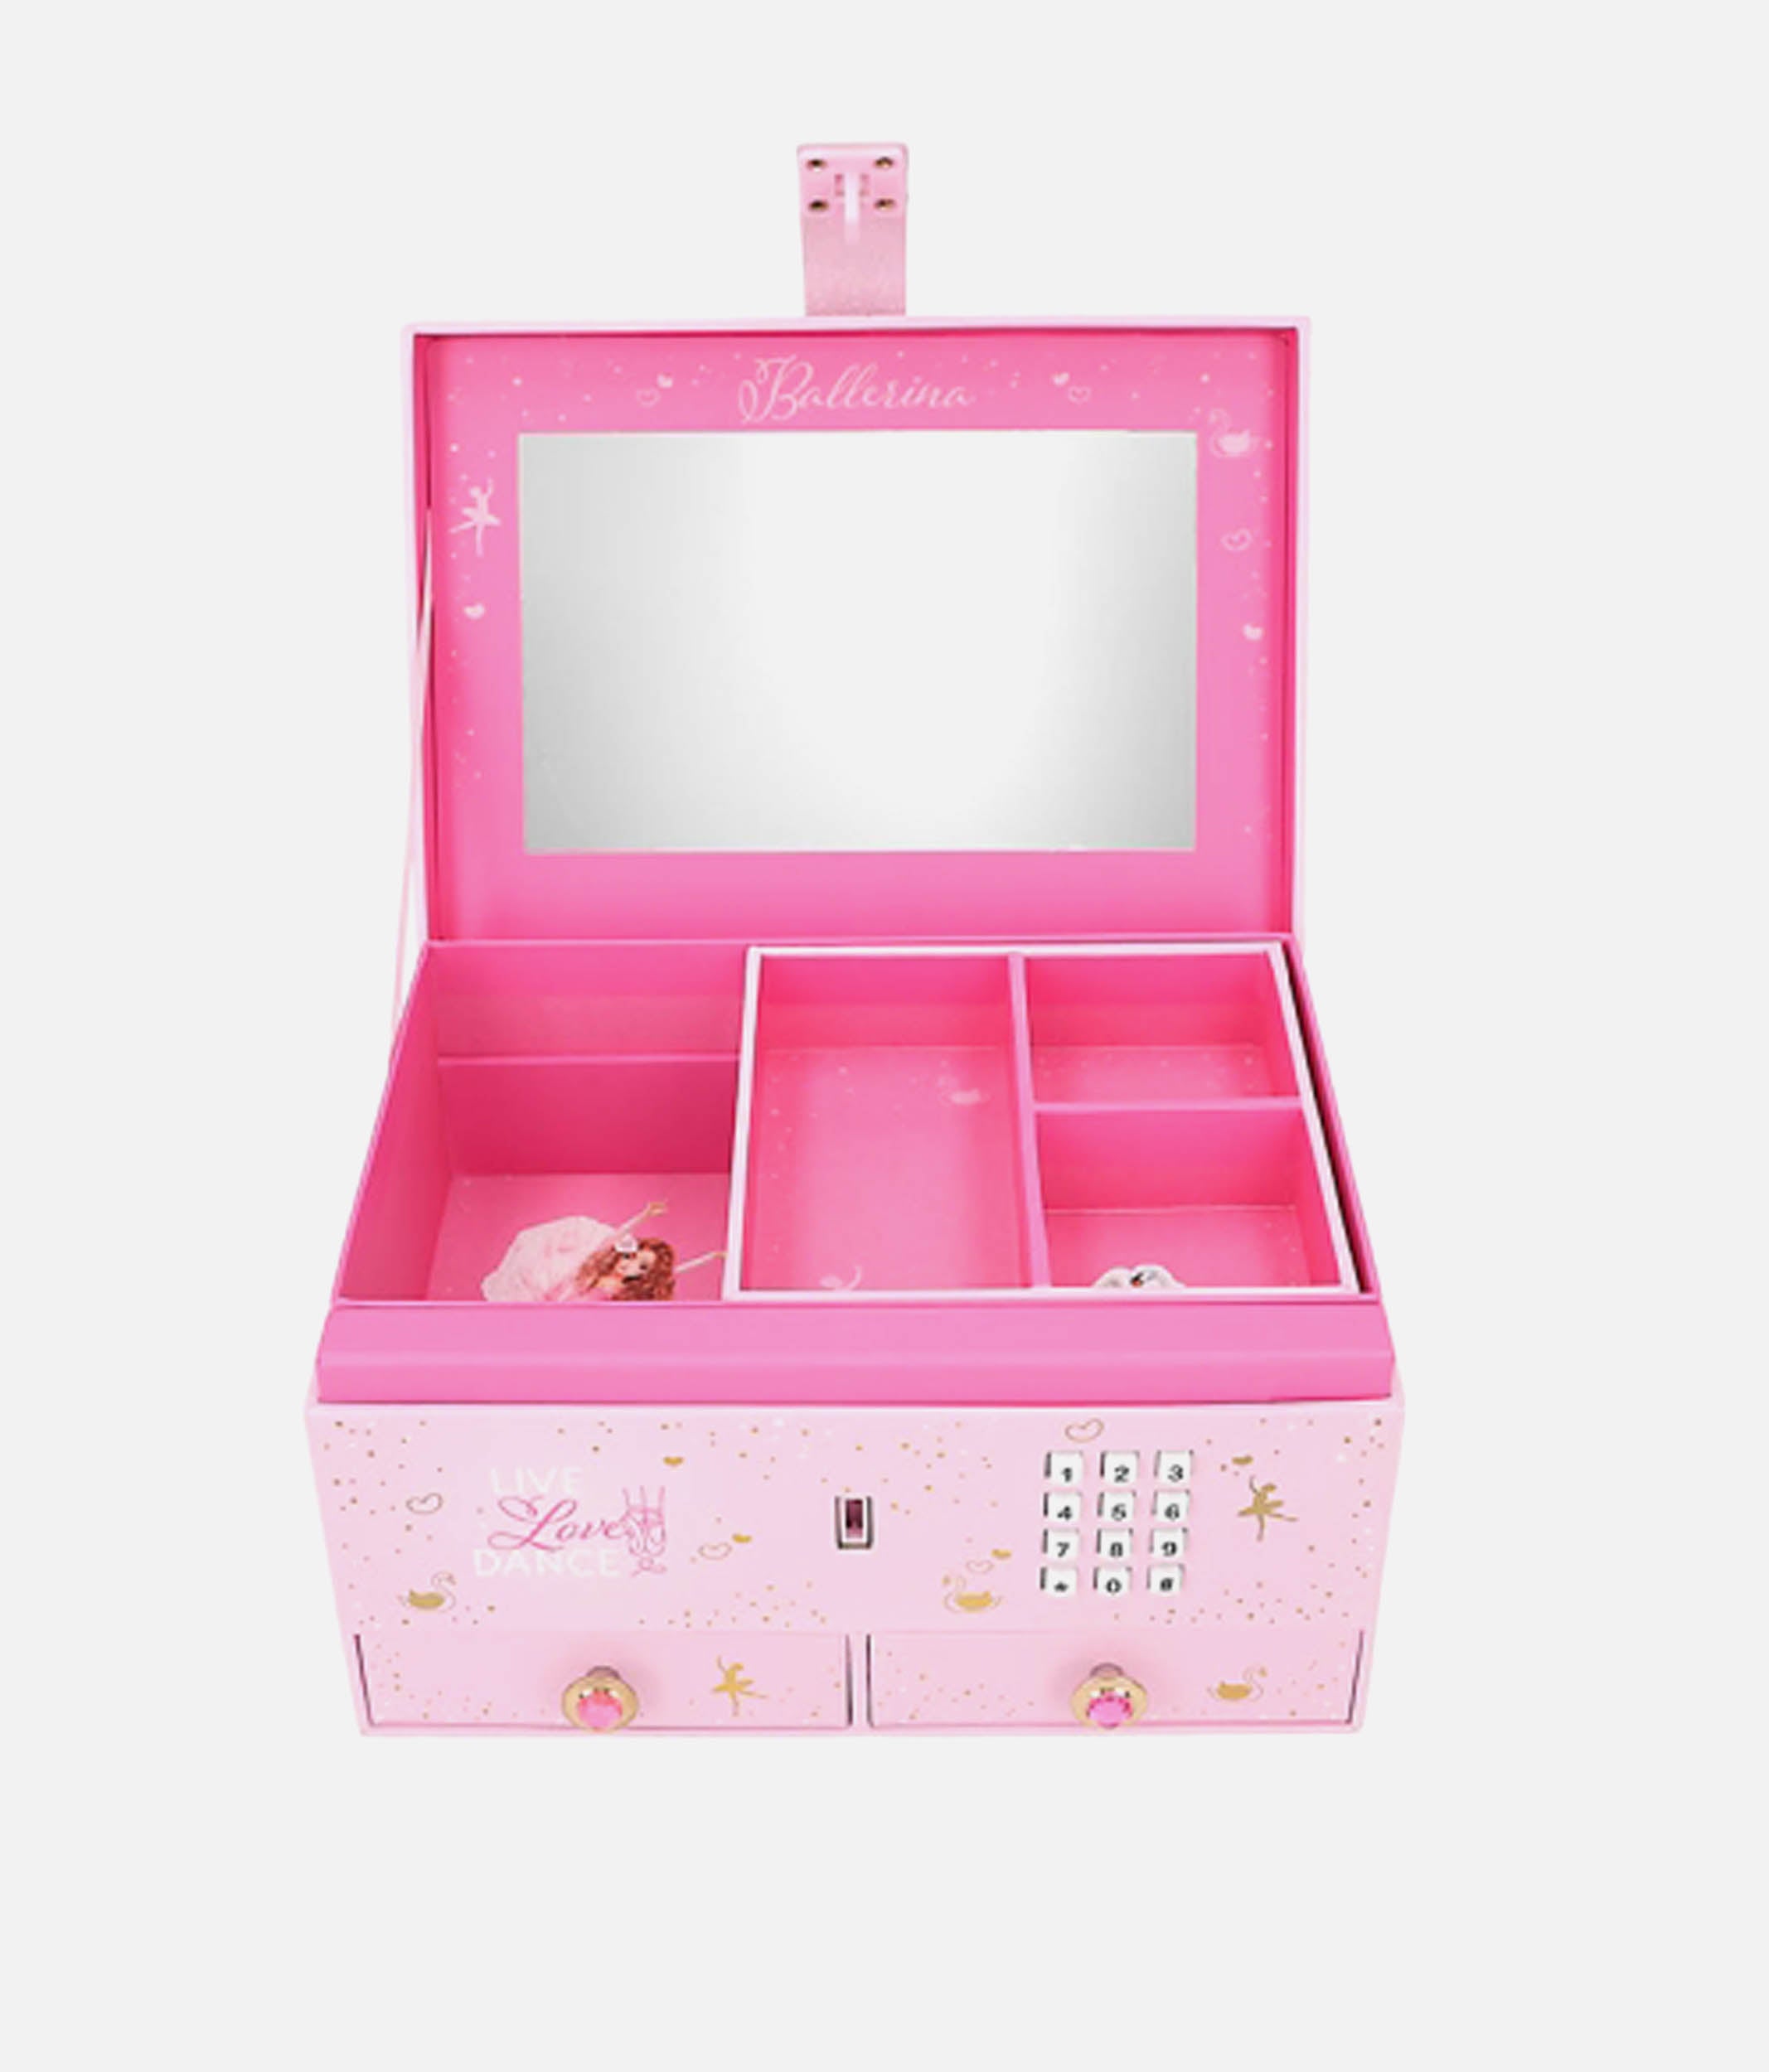 TOP Model Jewellery Box Ballet with Code and Sound